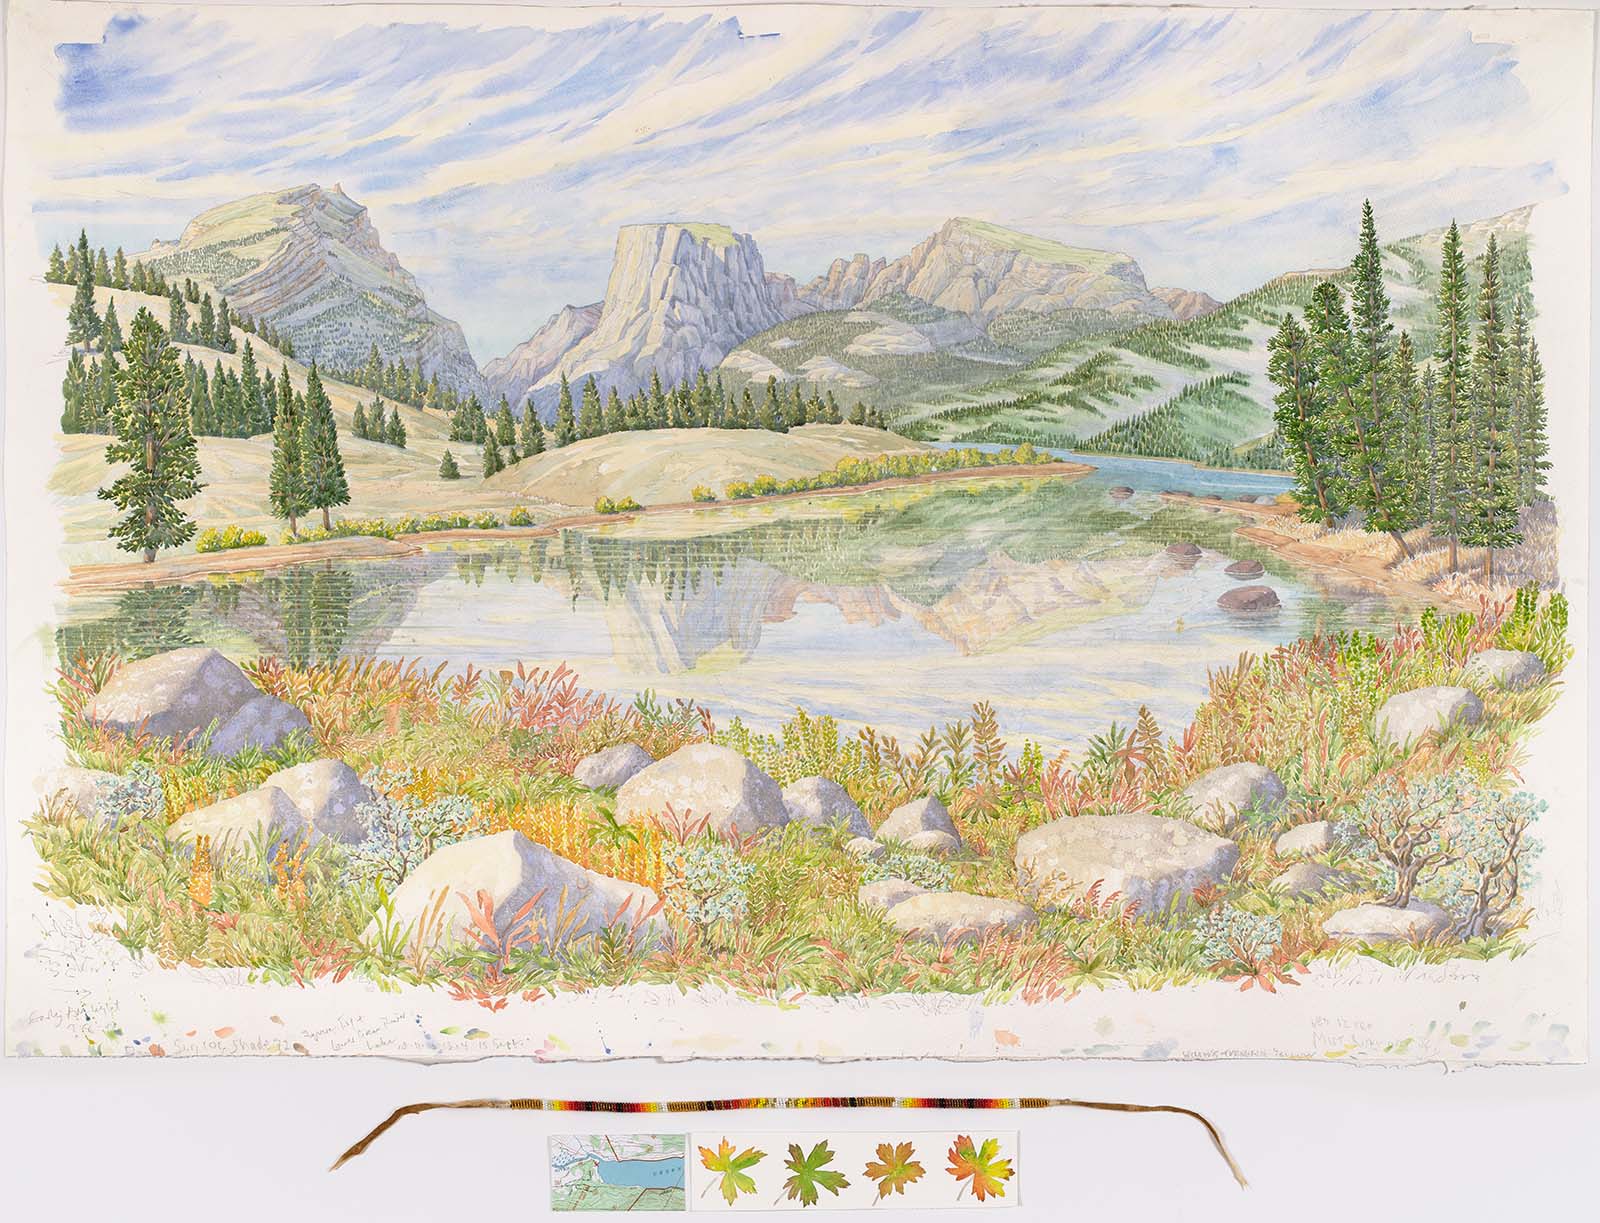 Tony Foster (b. 1946, Lincolnshire, England). "From Lower Green River Lake Looking South South East to Squaretop," 2022. Graphite and watercolour on paper, with glass bead necklace by Chastity Teton, map, 45.5 x 58.5 inches. Collection of The Foster Museum.